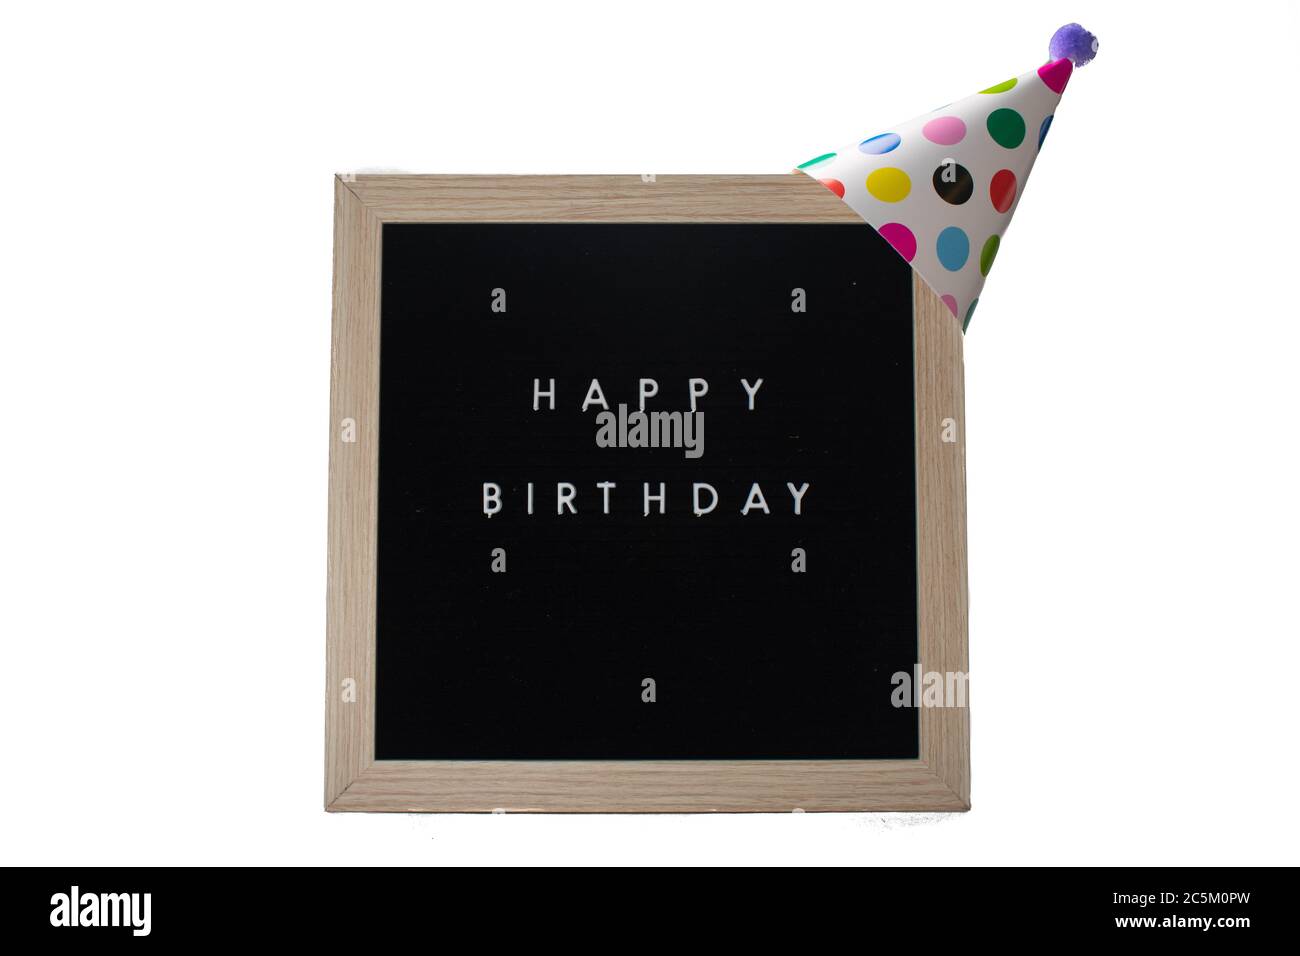 A Black Sign With a Birch Frame That Says Happy Birthday With a White Polka-Dotted Birthday Hat and a Purple Cotton Ball on Top on a Pure White Backgr Stock Photo